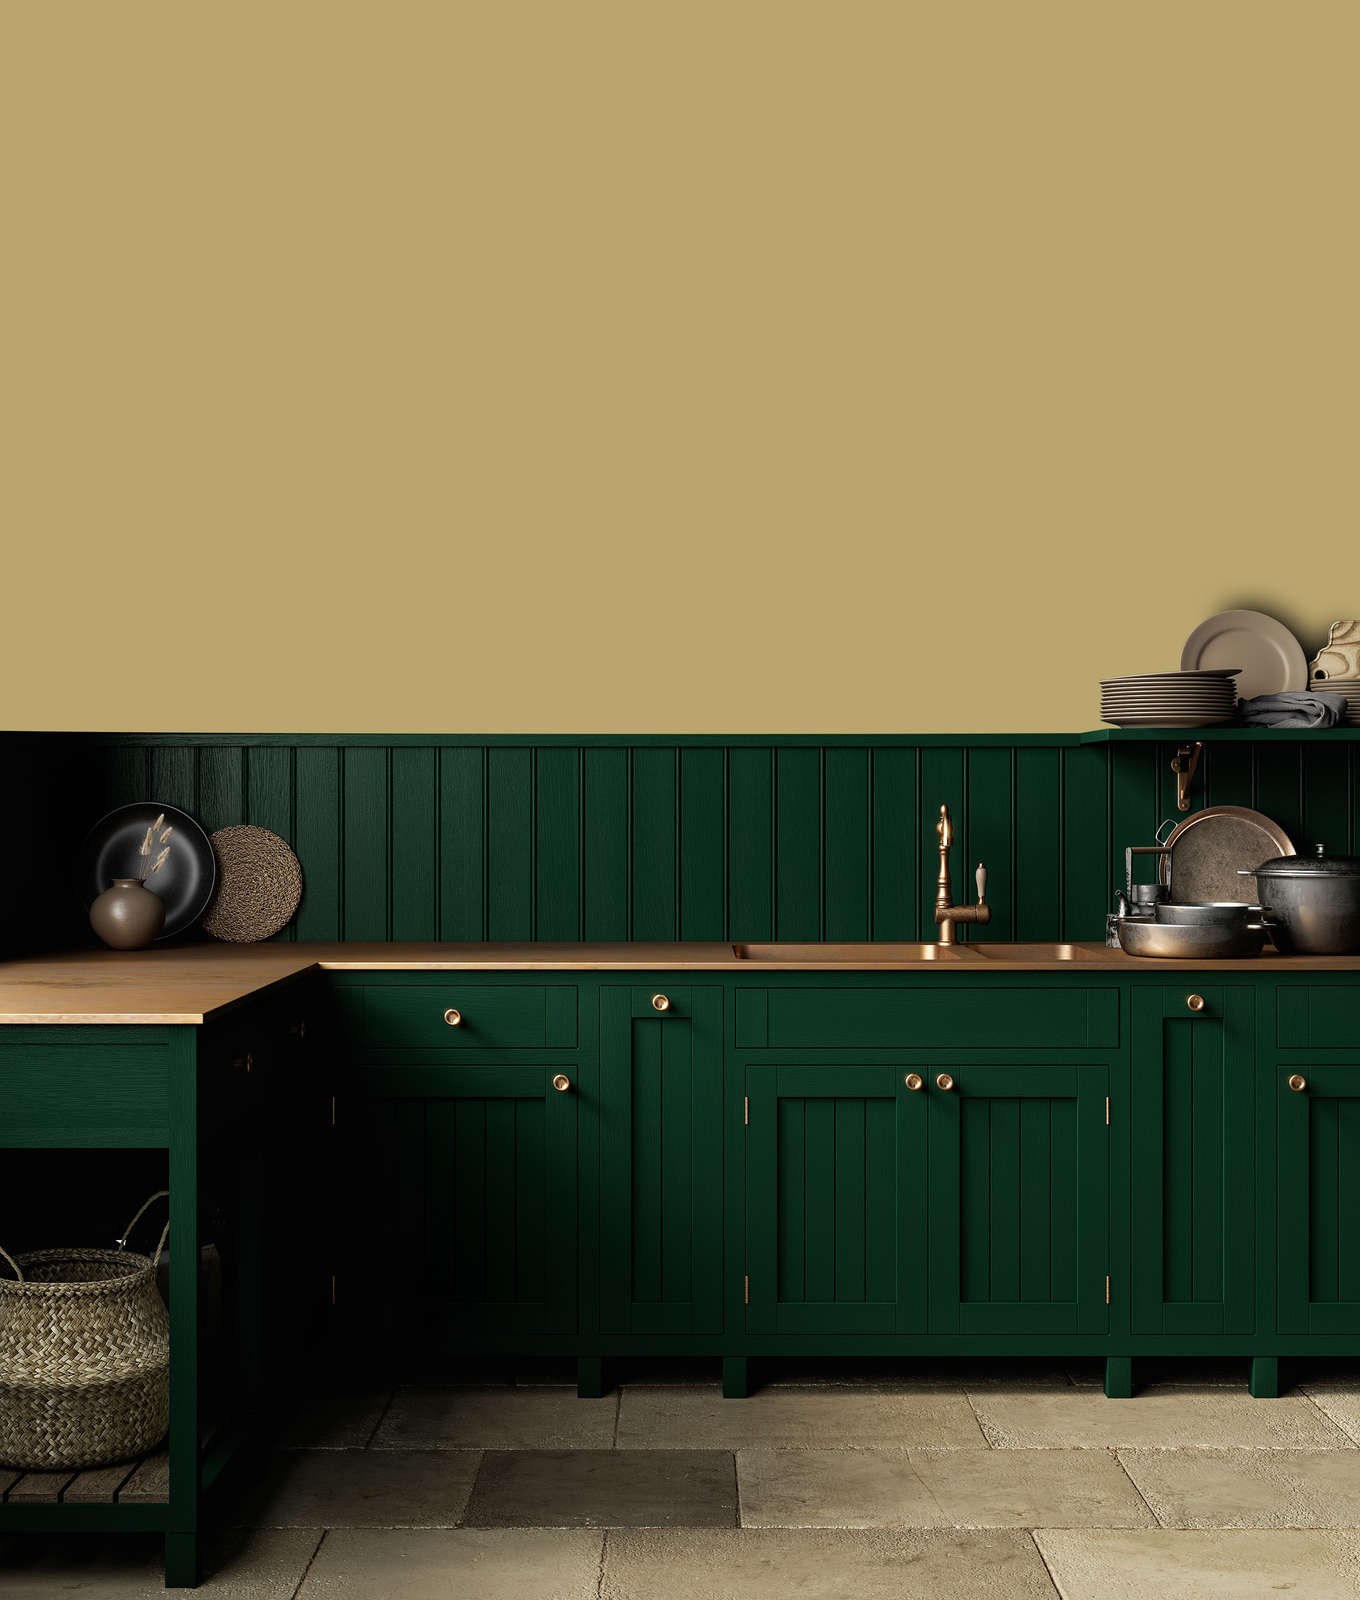             Premium Wall Paint Warm Khaki »Lucky Lime« NW605 – 1 litre
        